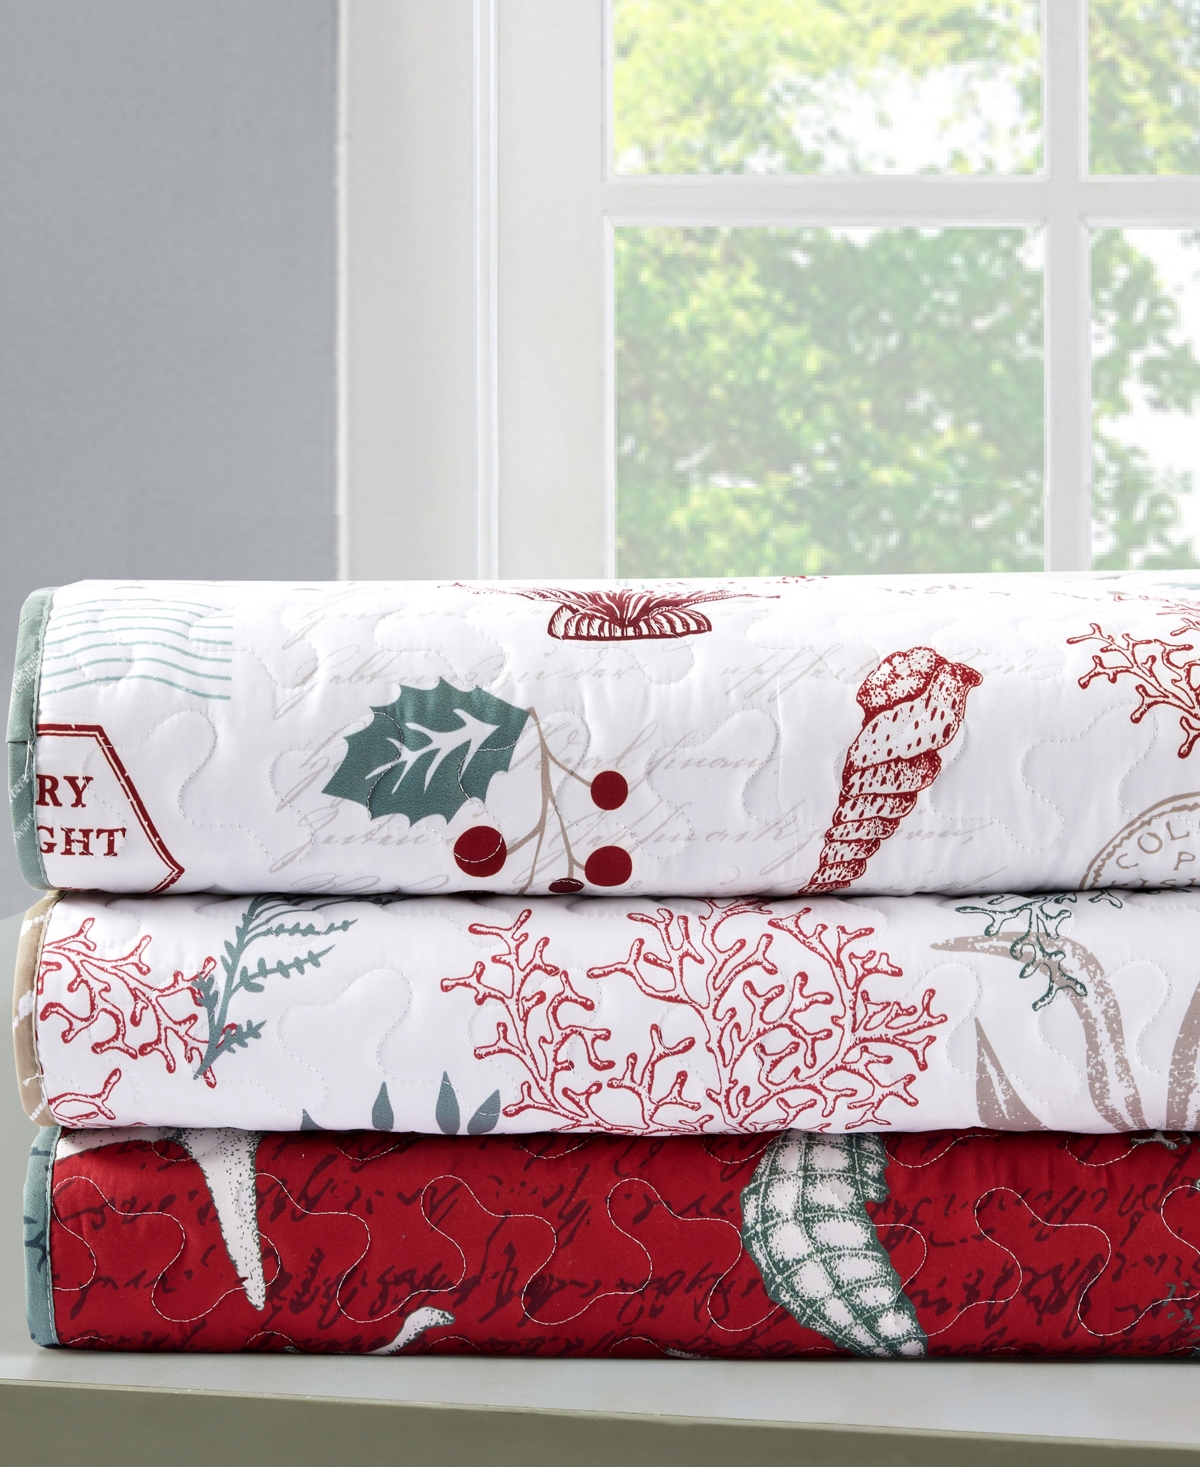 Shop Videri Home Festive Seahorse Reversible 3-piece Quilt Set, Full/queen In Red Multi